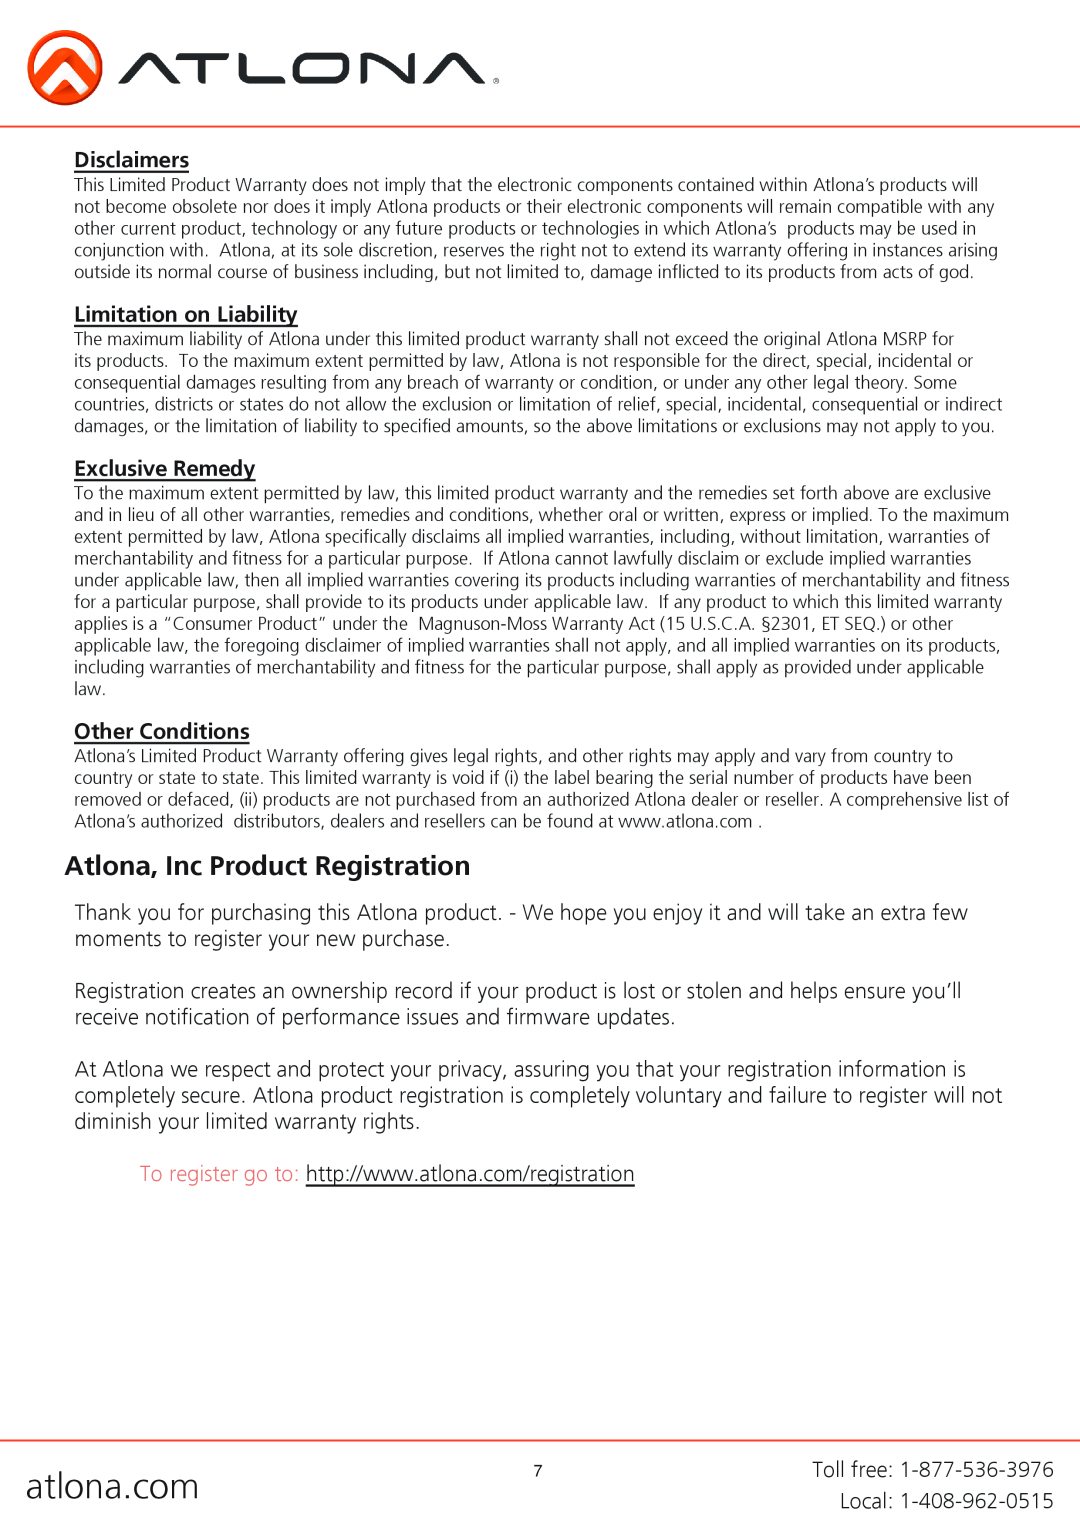 Atlona AT-RGB110 Atlona, Inc Product Registration, Disclaimers, Limitation on Liability, Exclusive Remedy, atlona.com 